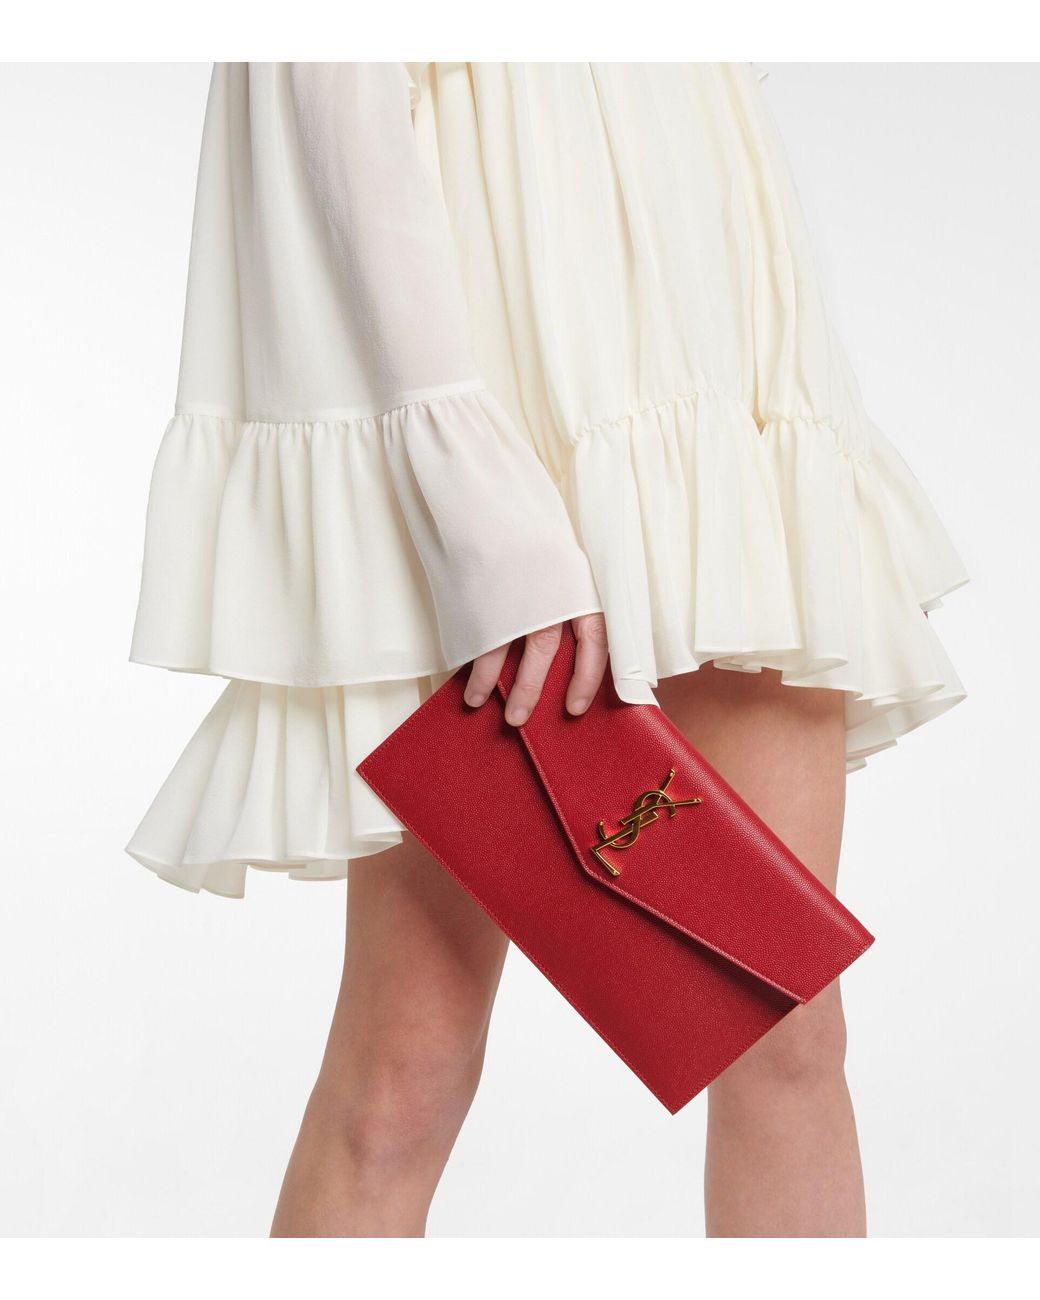 Saint Laurent Uptown Leather Clutch in Red | Lyst